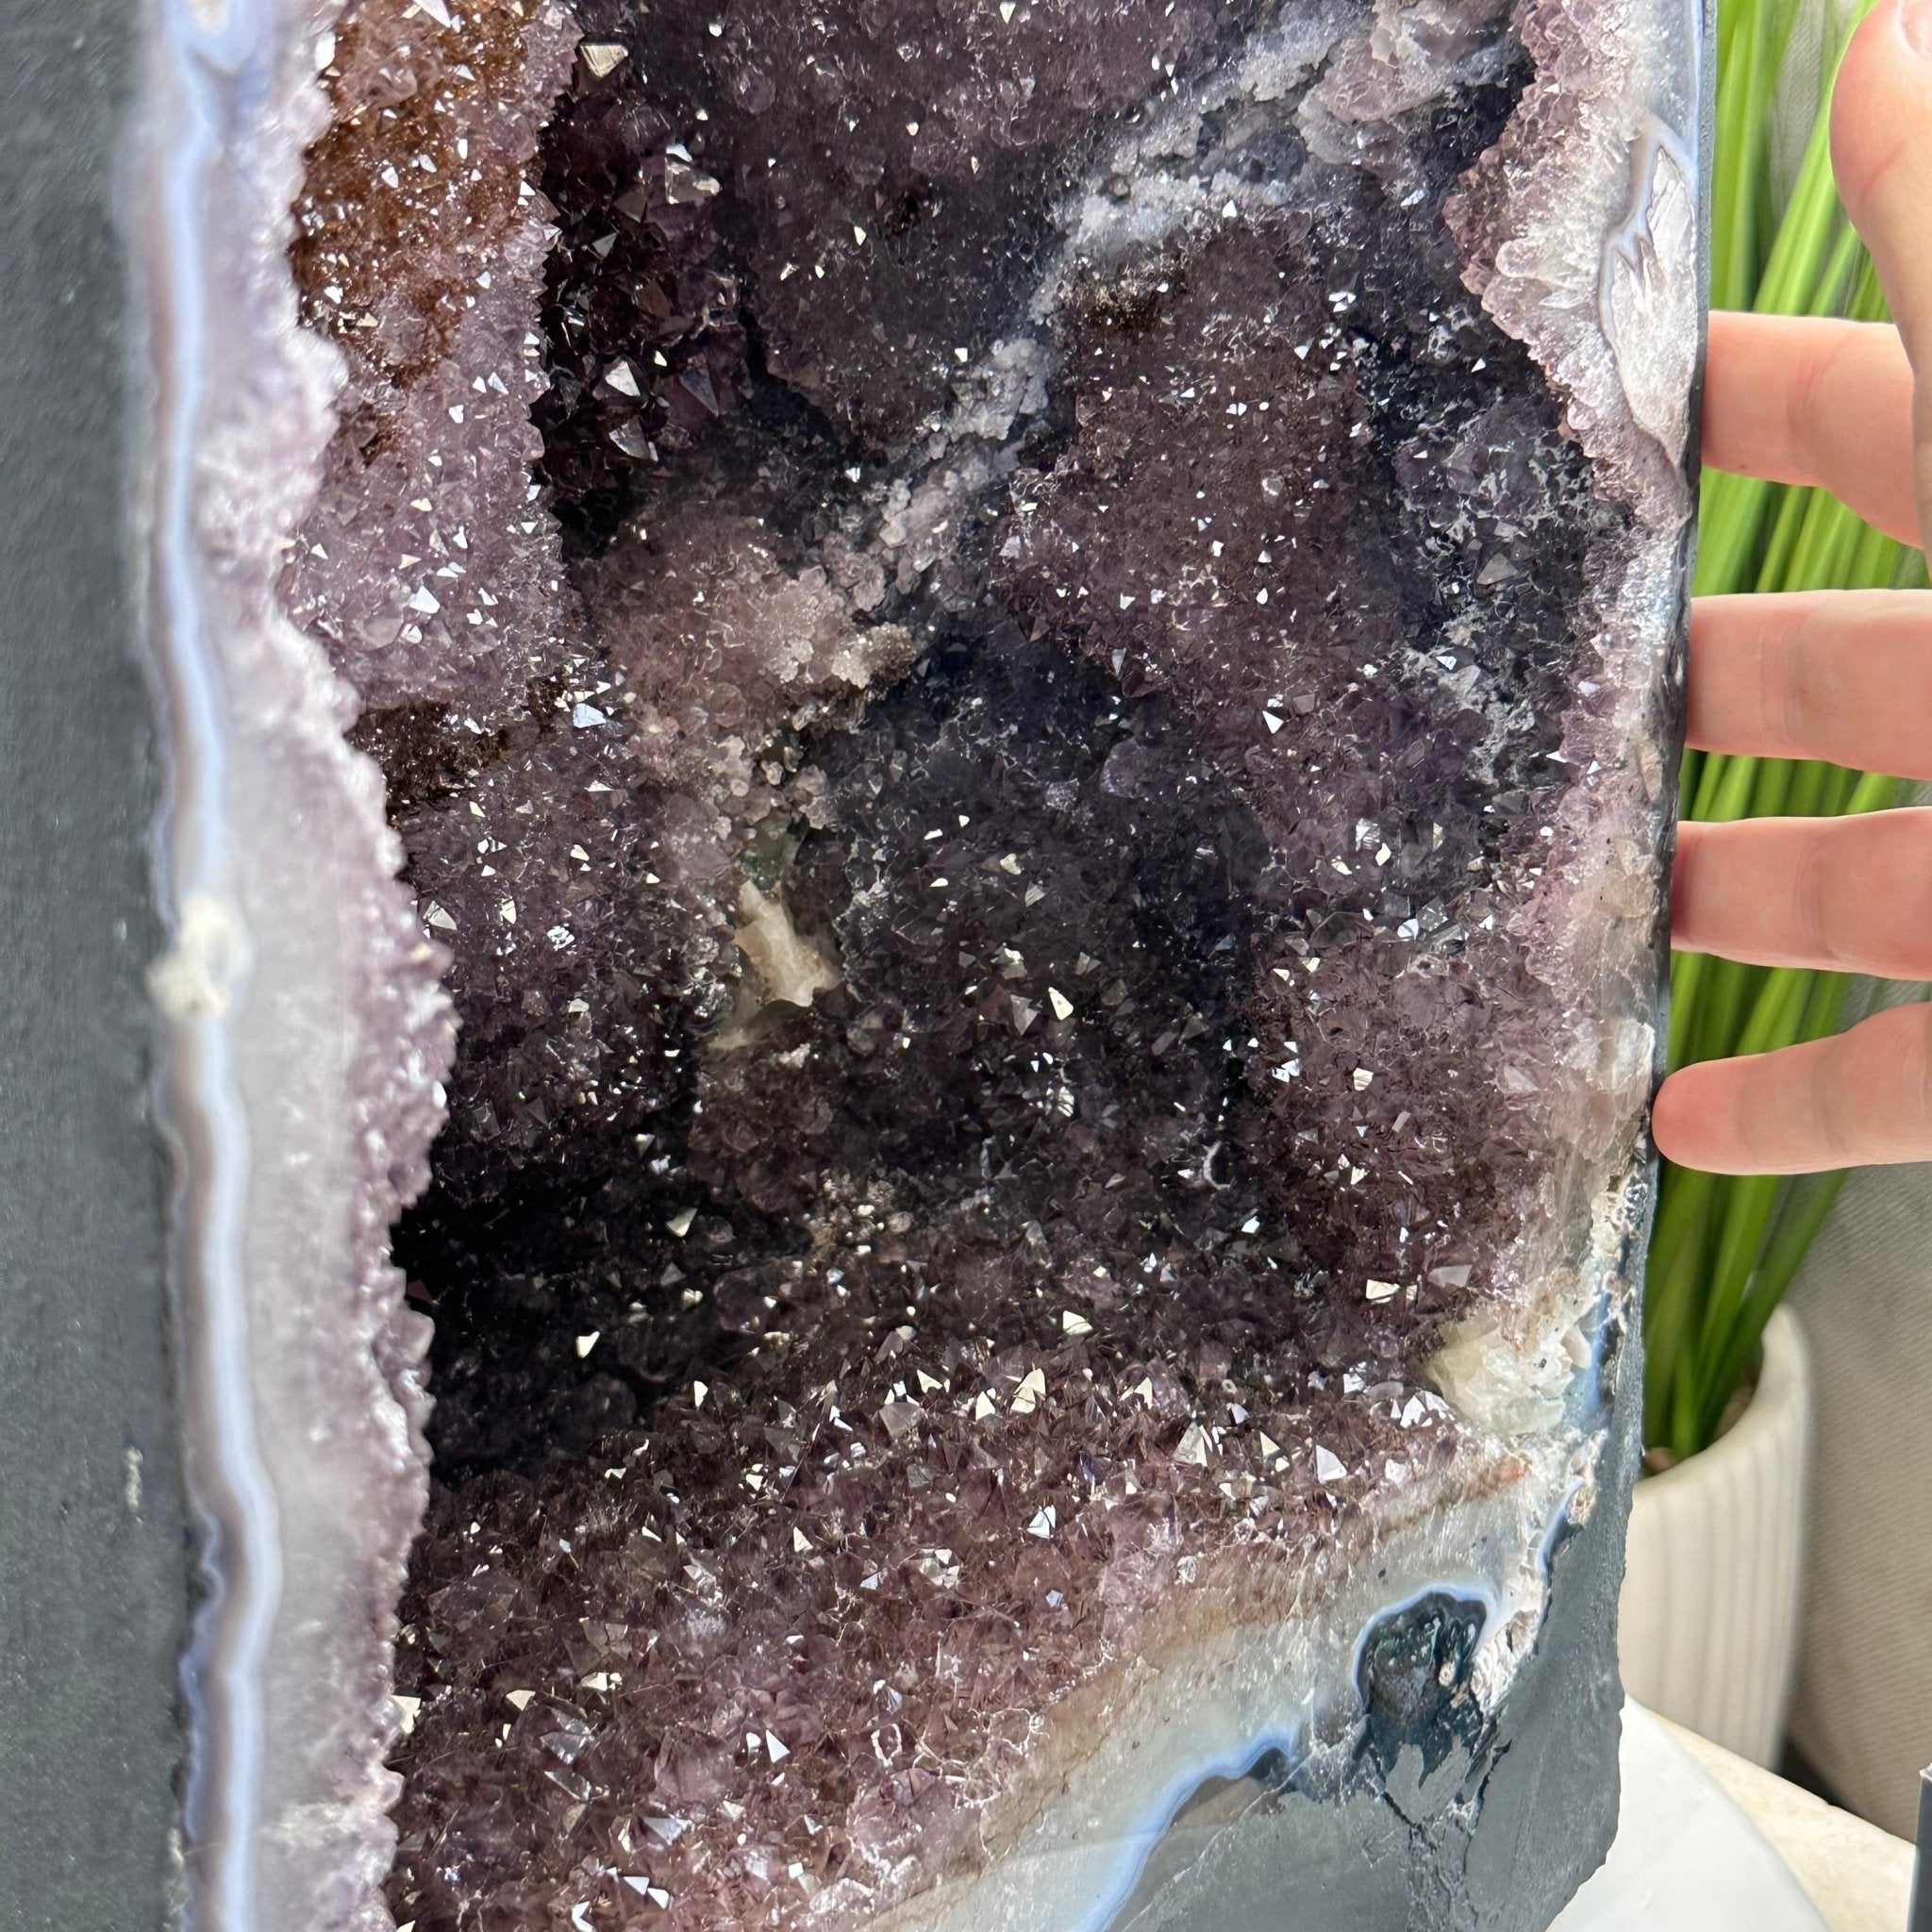 Extra Quality Brazilian Amethyst Cathedral, 83 lbs & 26.5” tall Model #5601-0827 by Brazil Gems - Brazil GemsBrazil GemsExtra Quality Brazilian Amethyst Cathedral, 83 lbs & 26.5” tall Model #5601-0827 by Brazil GemsCathedrals5601-0827